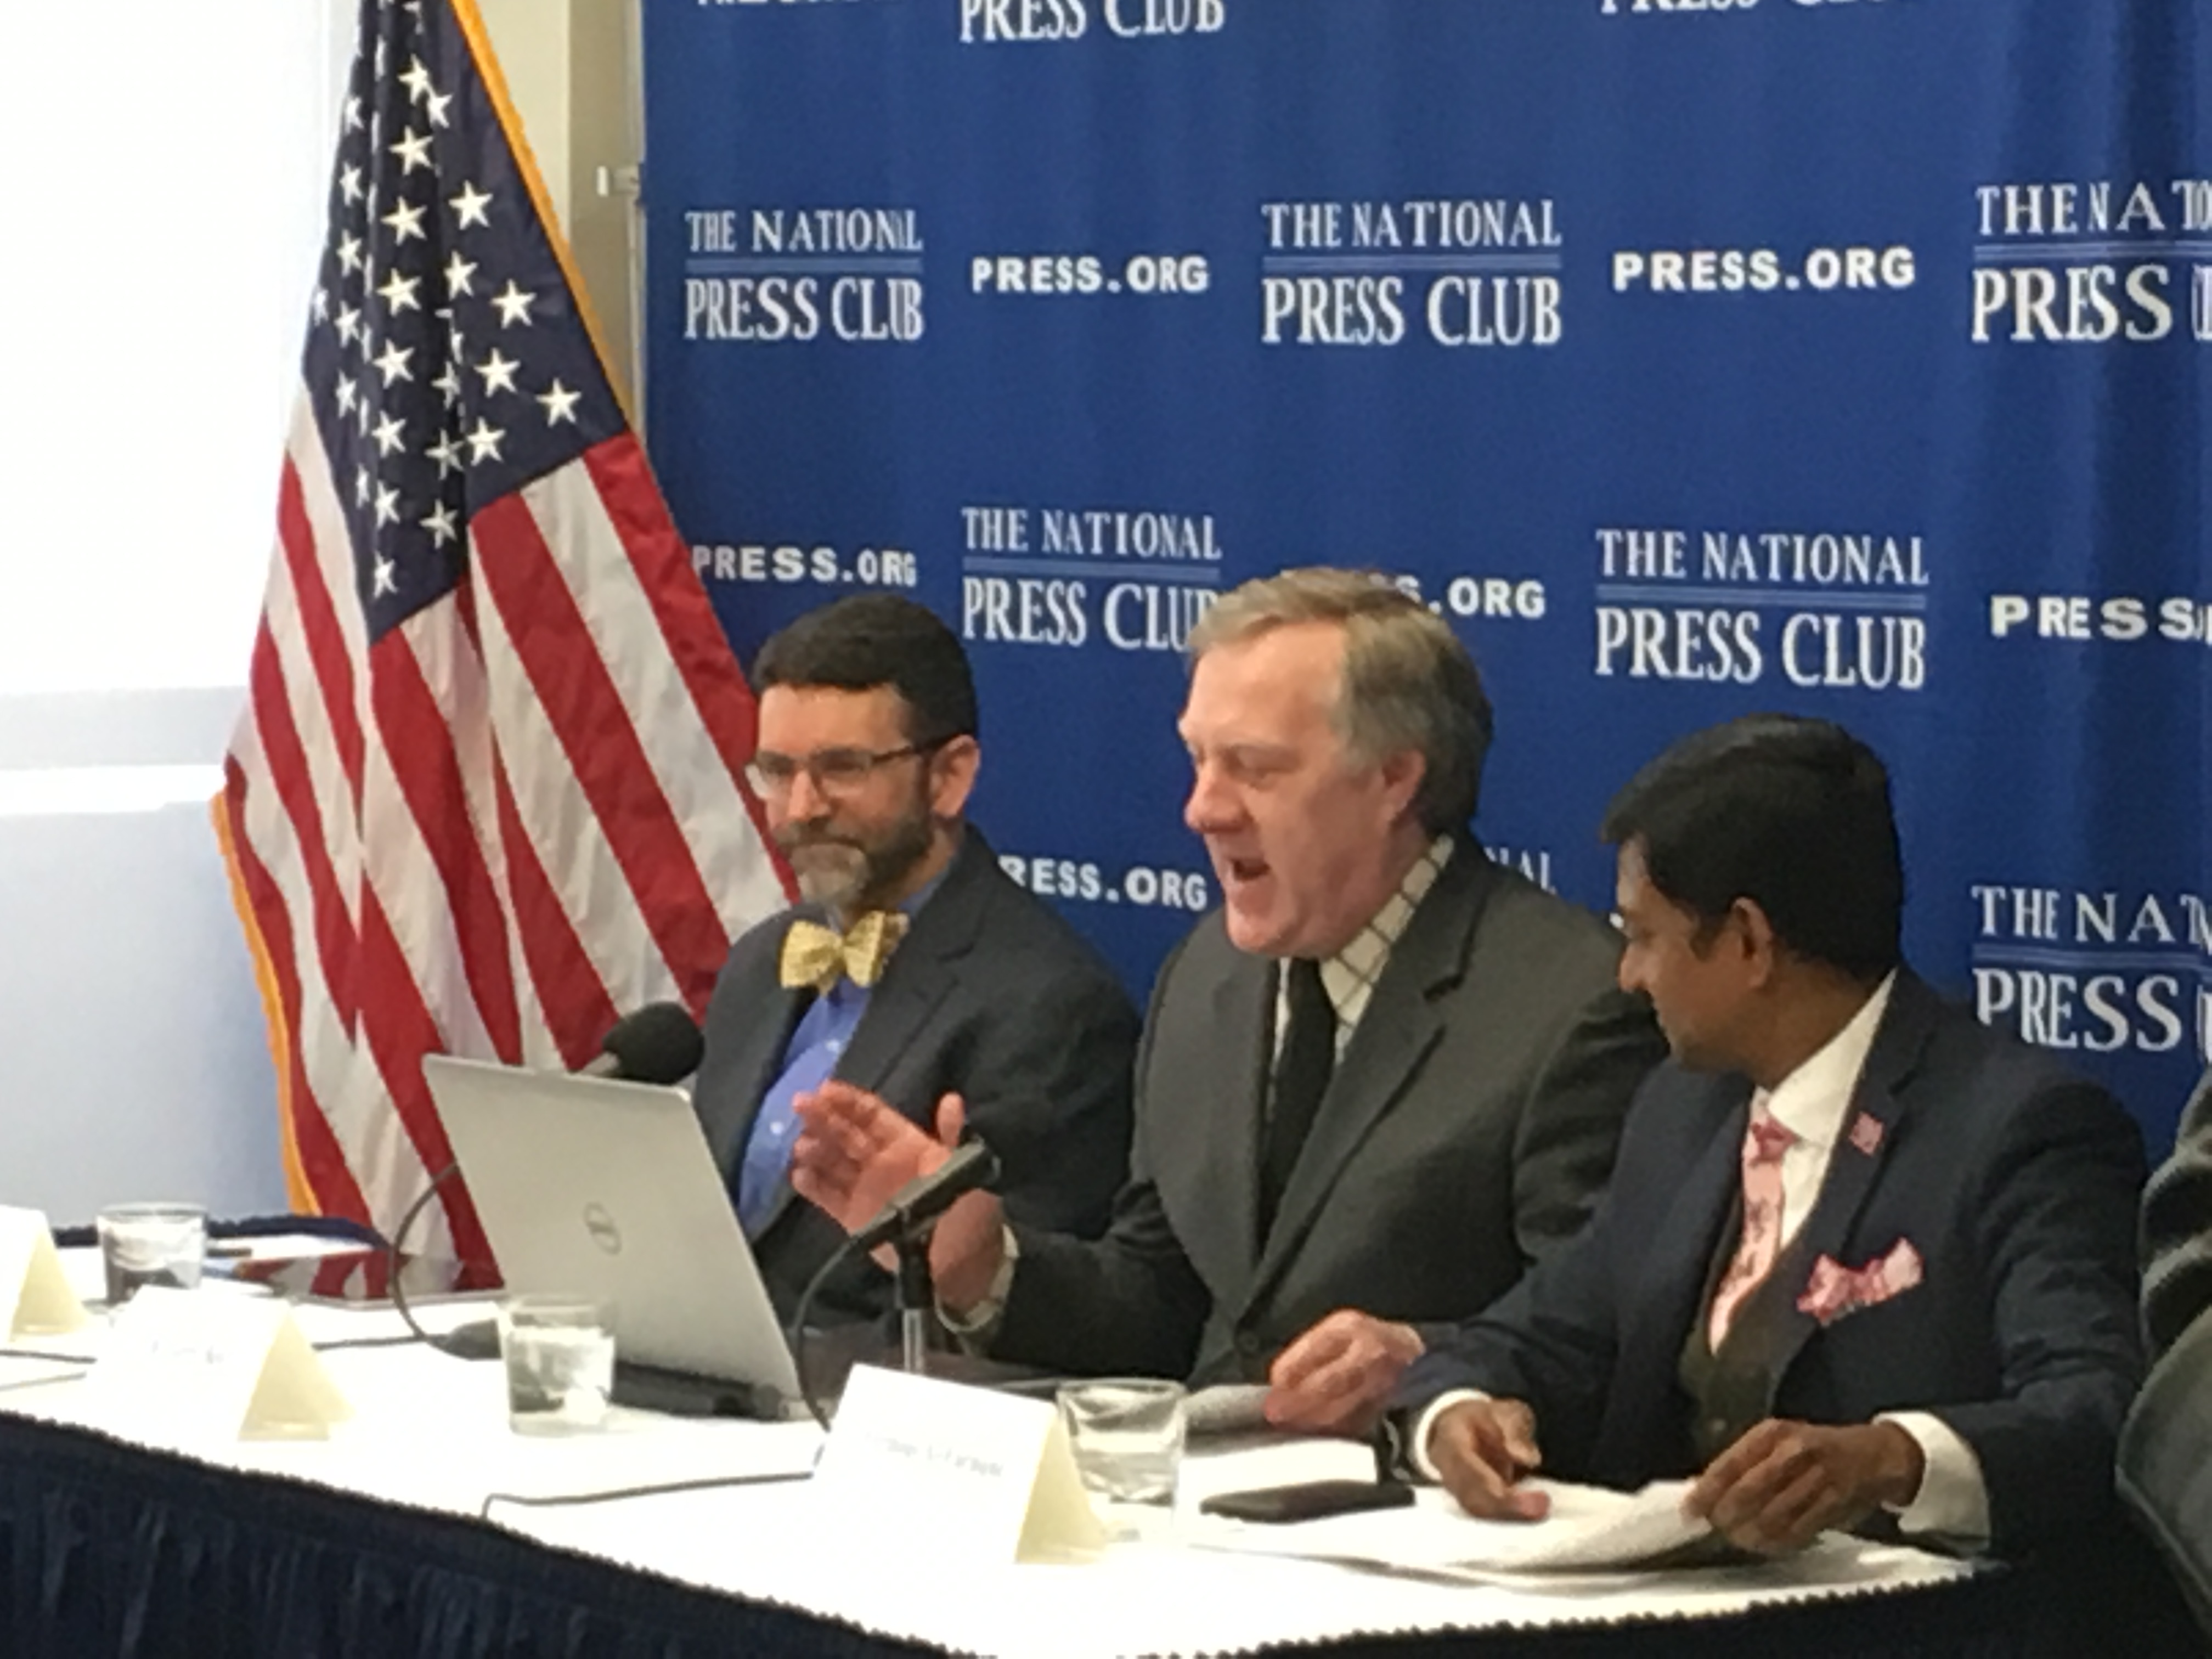 April 2018: NOAA's lead seasonal hurricane forecaster, Dr. Gerry Bell, delivers remarks about the accuracy of NOAA’s seasonal outlooks and the importance of hurricane season preparedness at the National Press Club in Washington, D.C.